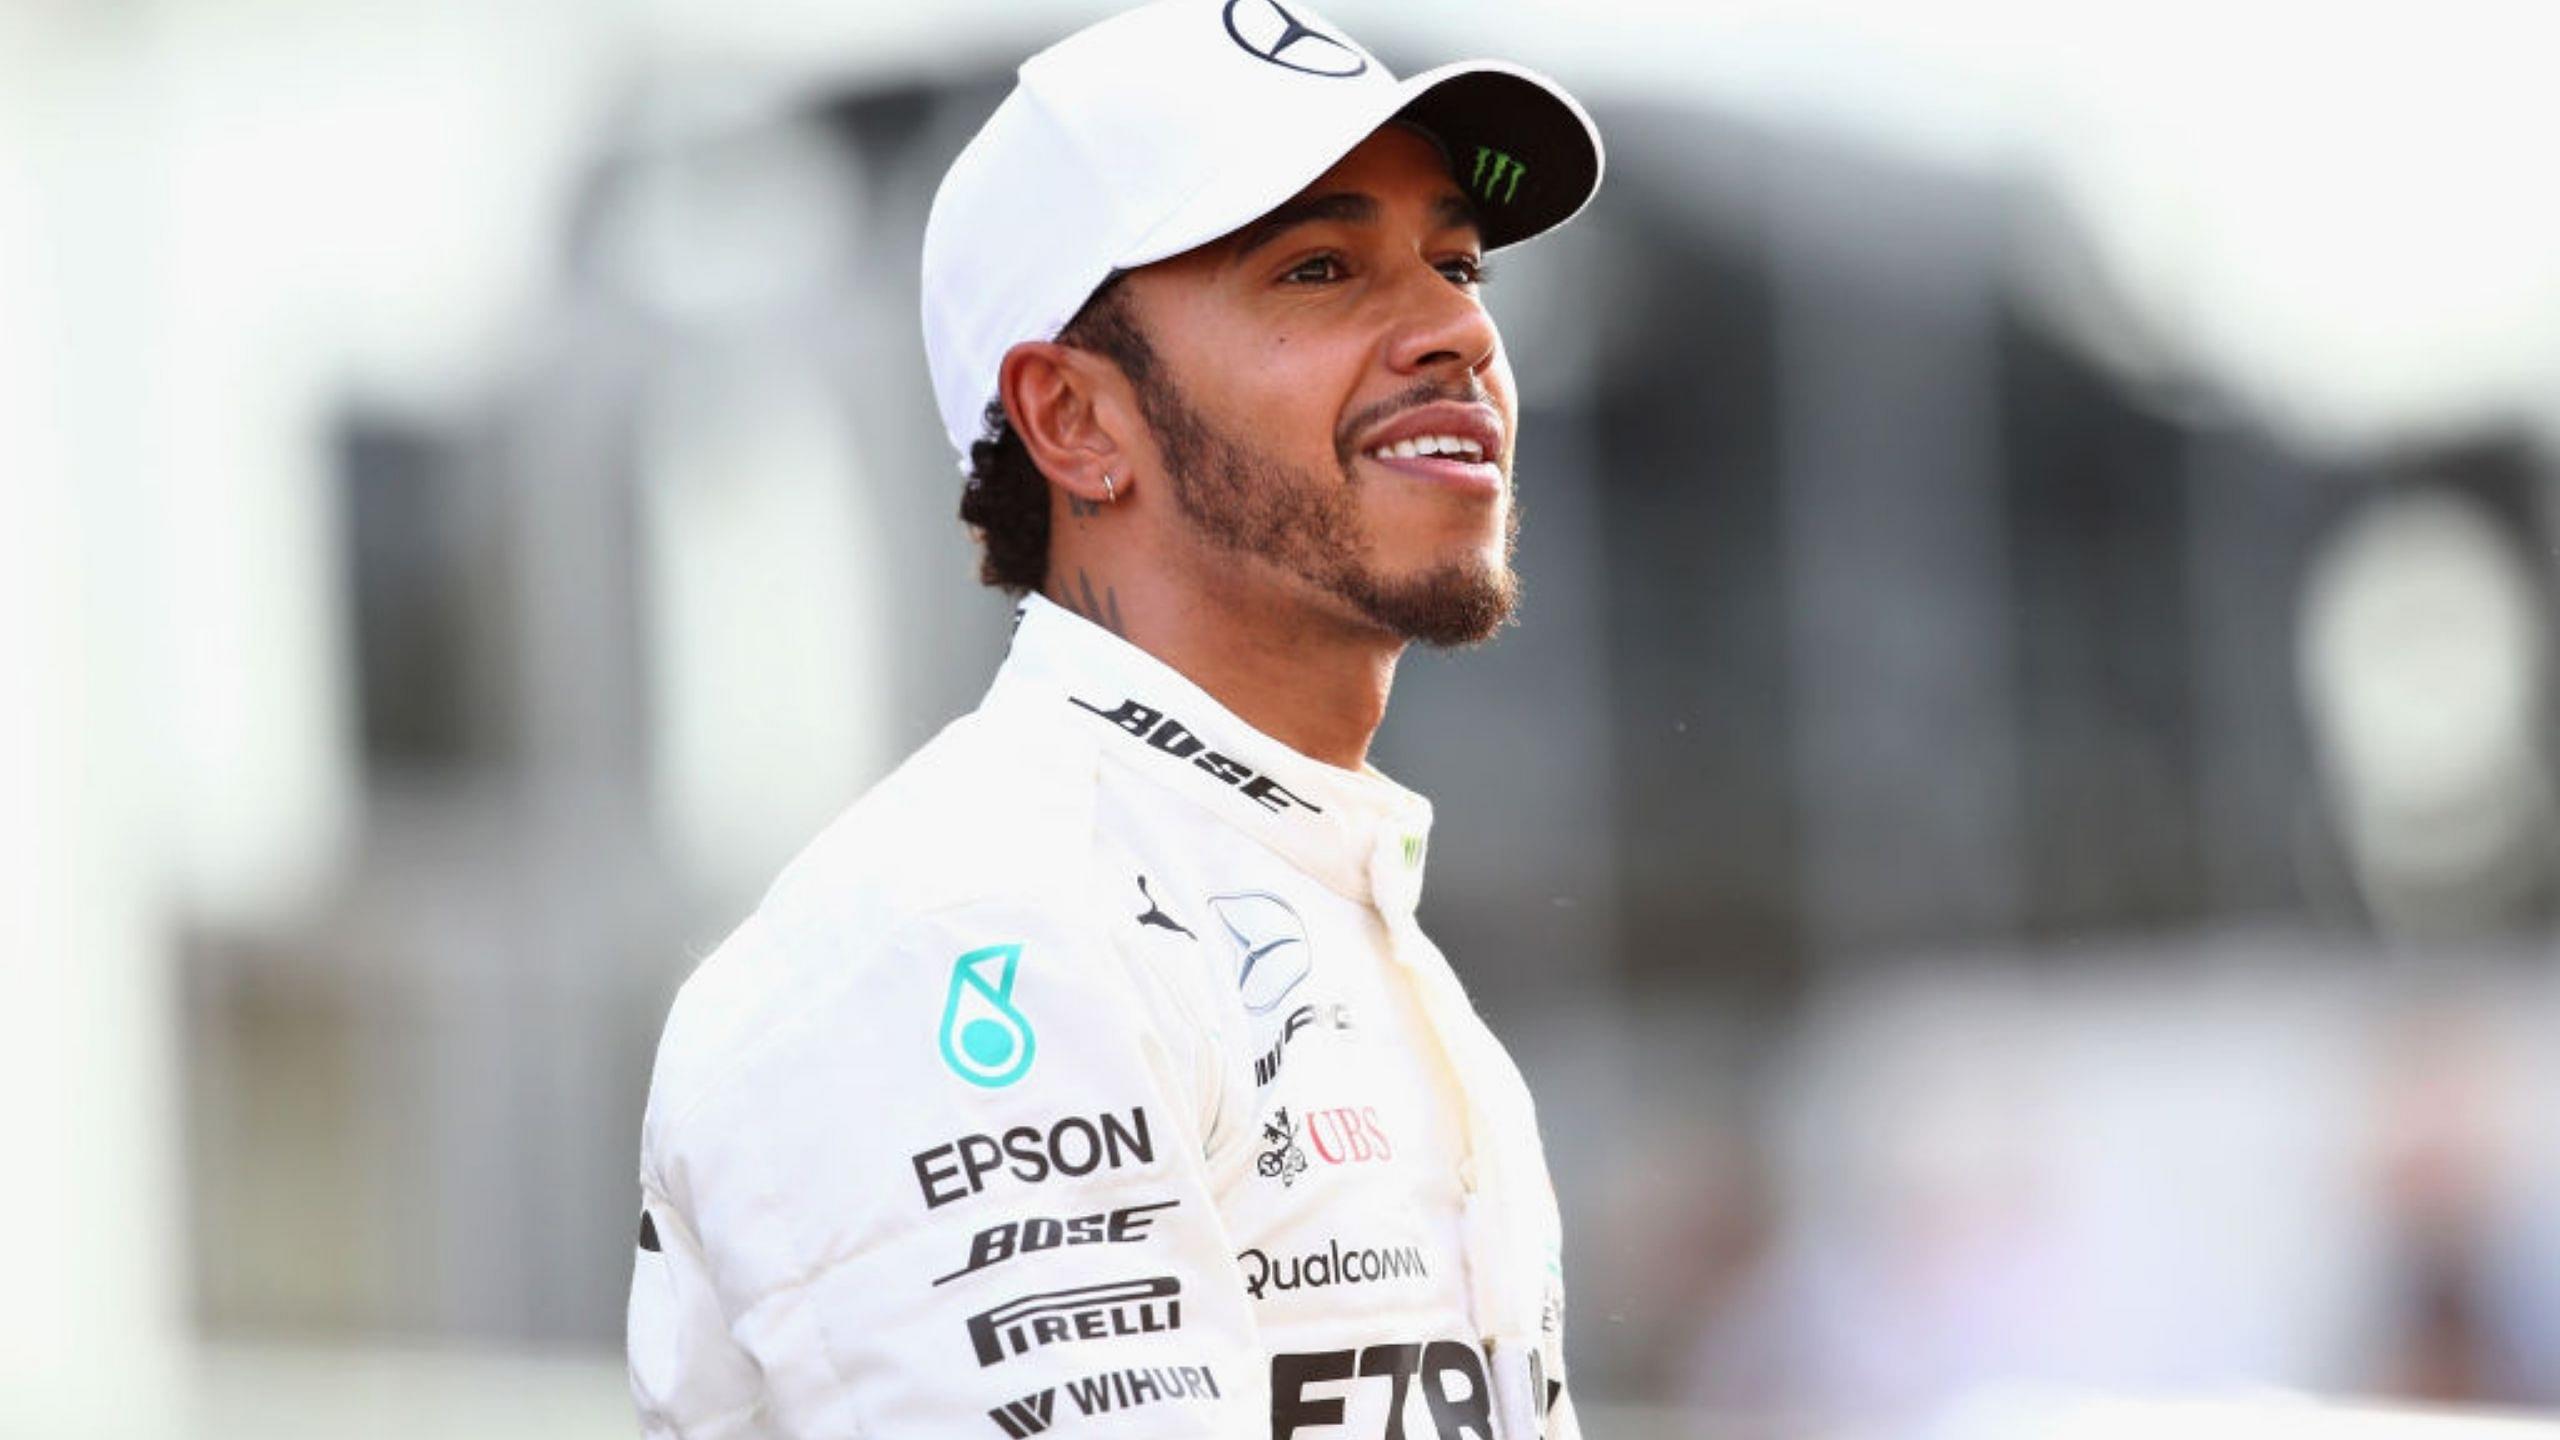 Lewis Hamilton to receive knighthood in New Year's Honours after clearing tax-related disputes